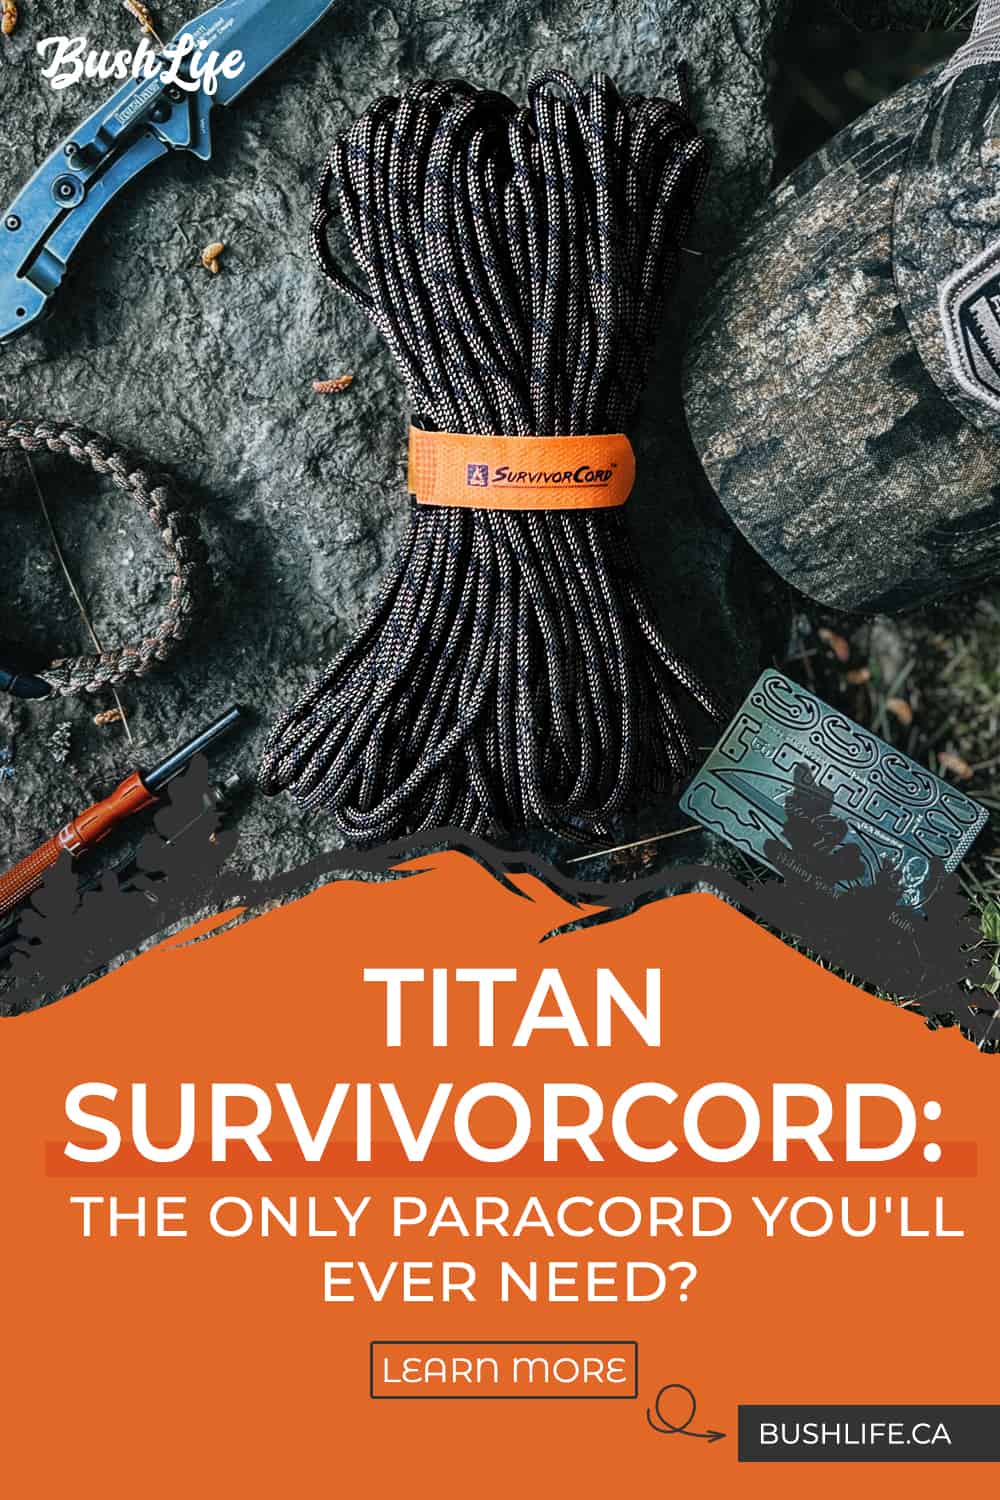 TITAN SURVIVORCORD: The Only Paracord You'll Ever Need?